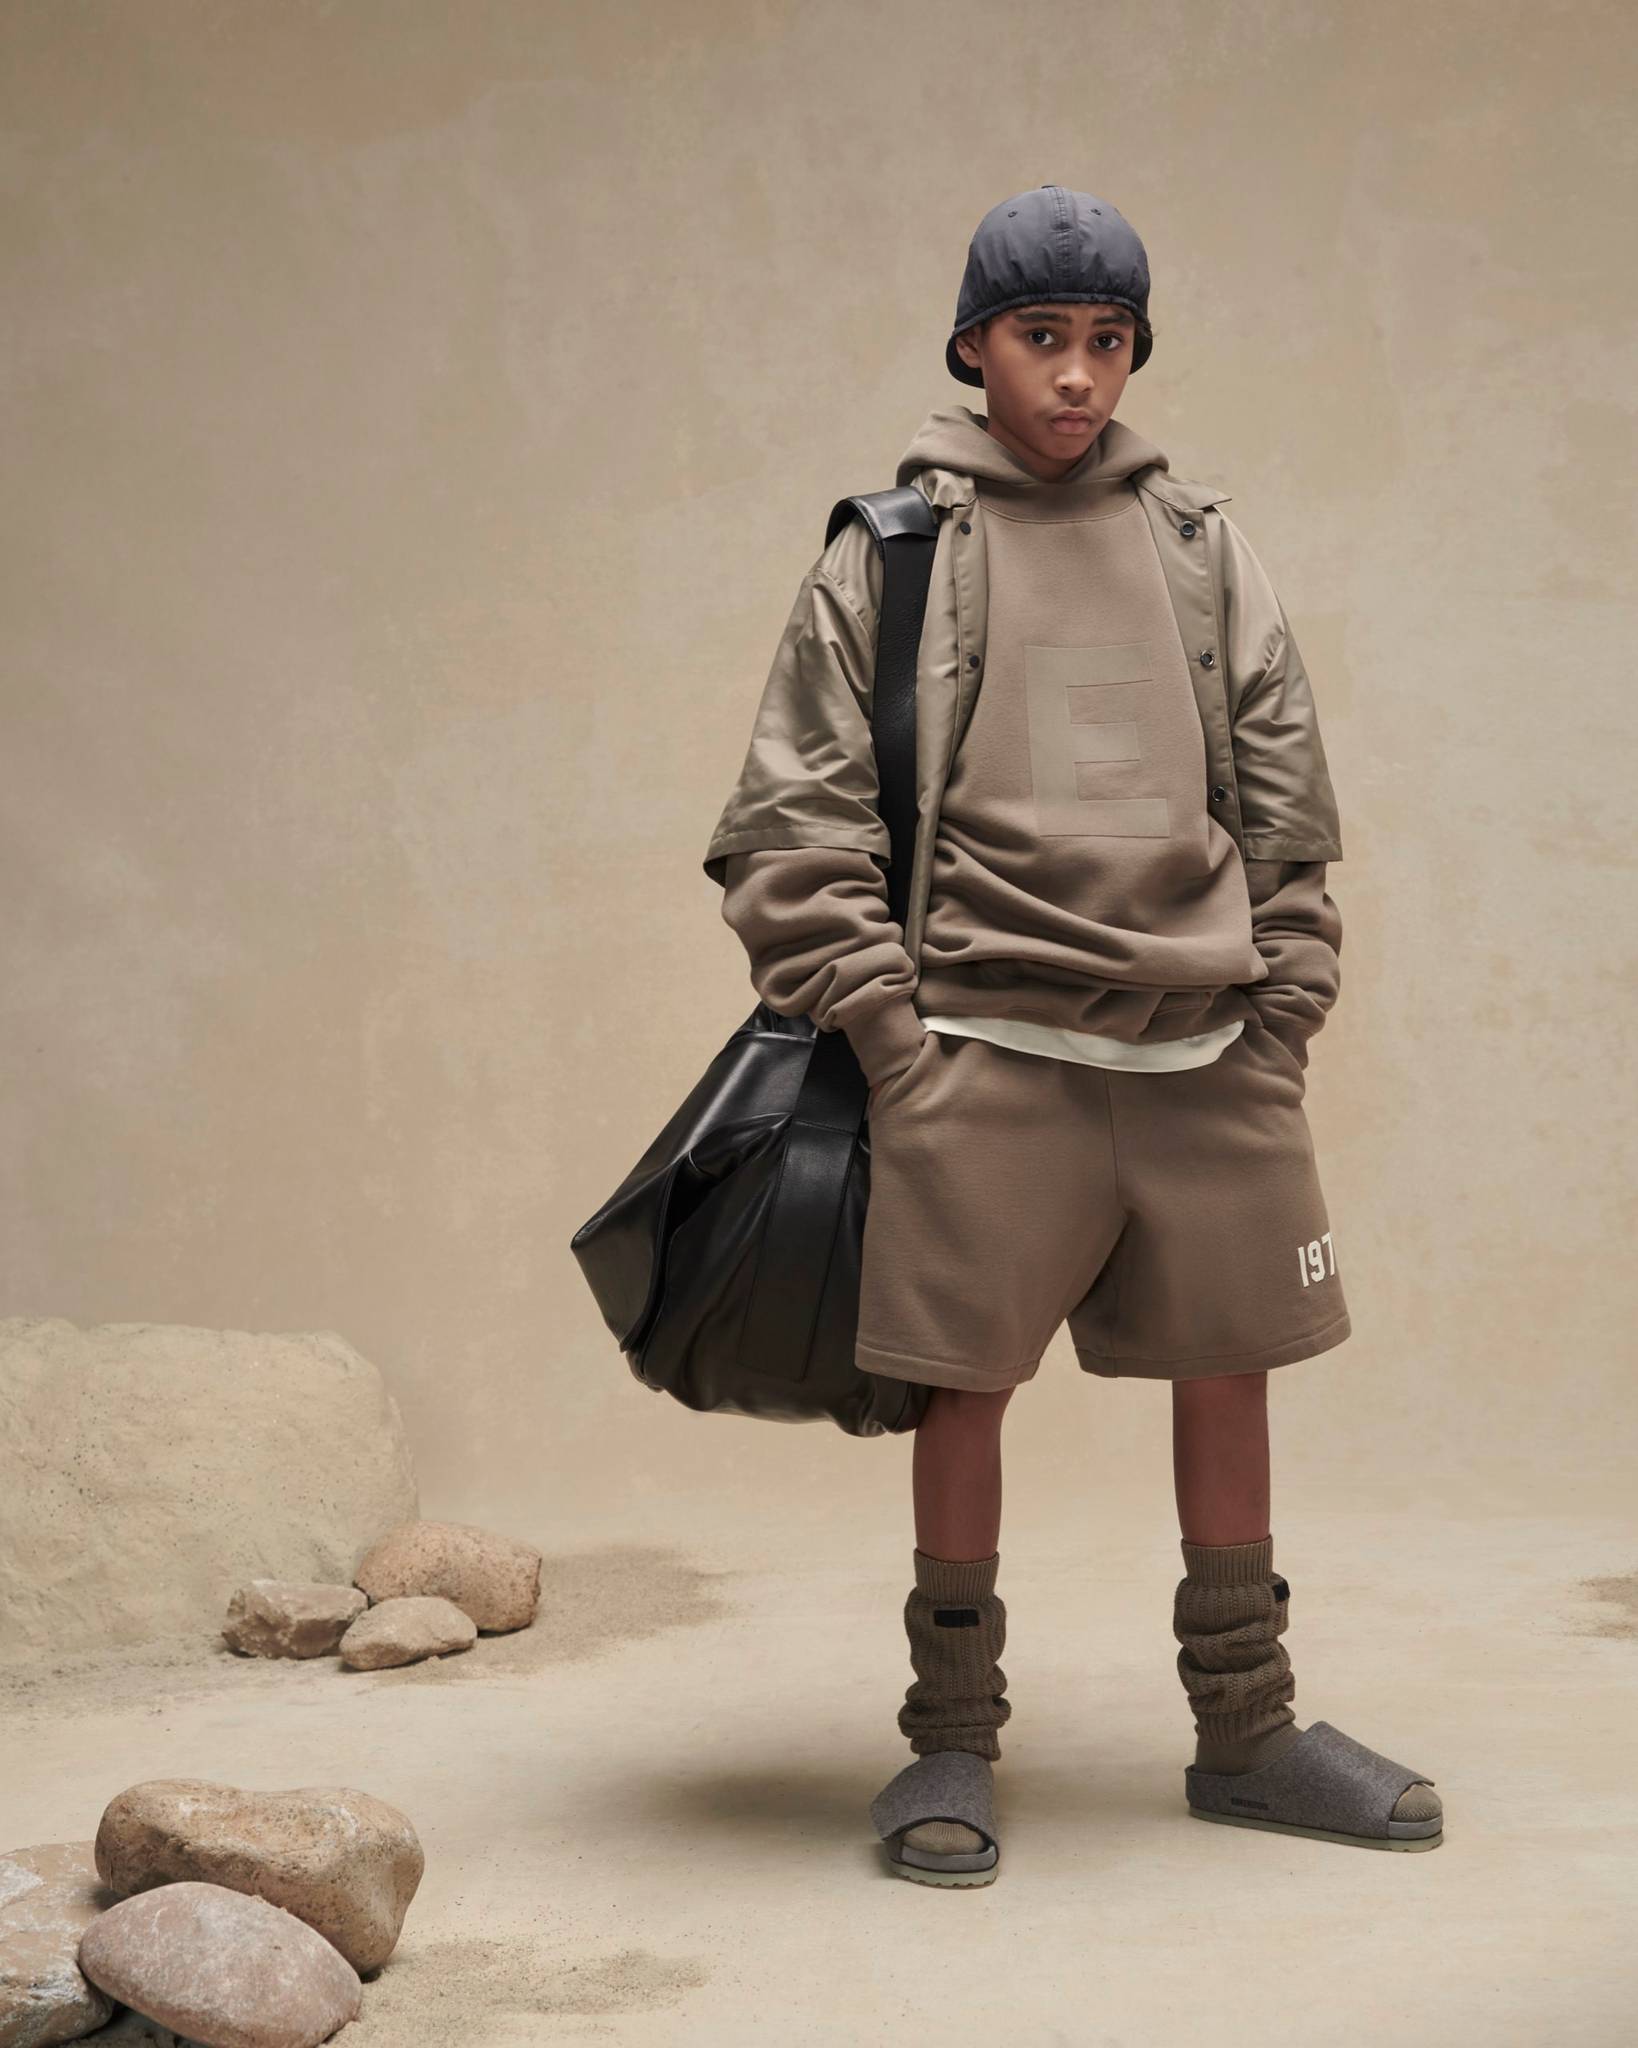 Fear of God ESSENTIALS Fall 2022 Collection